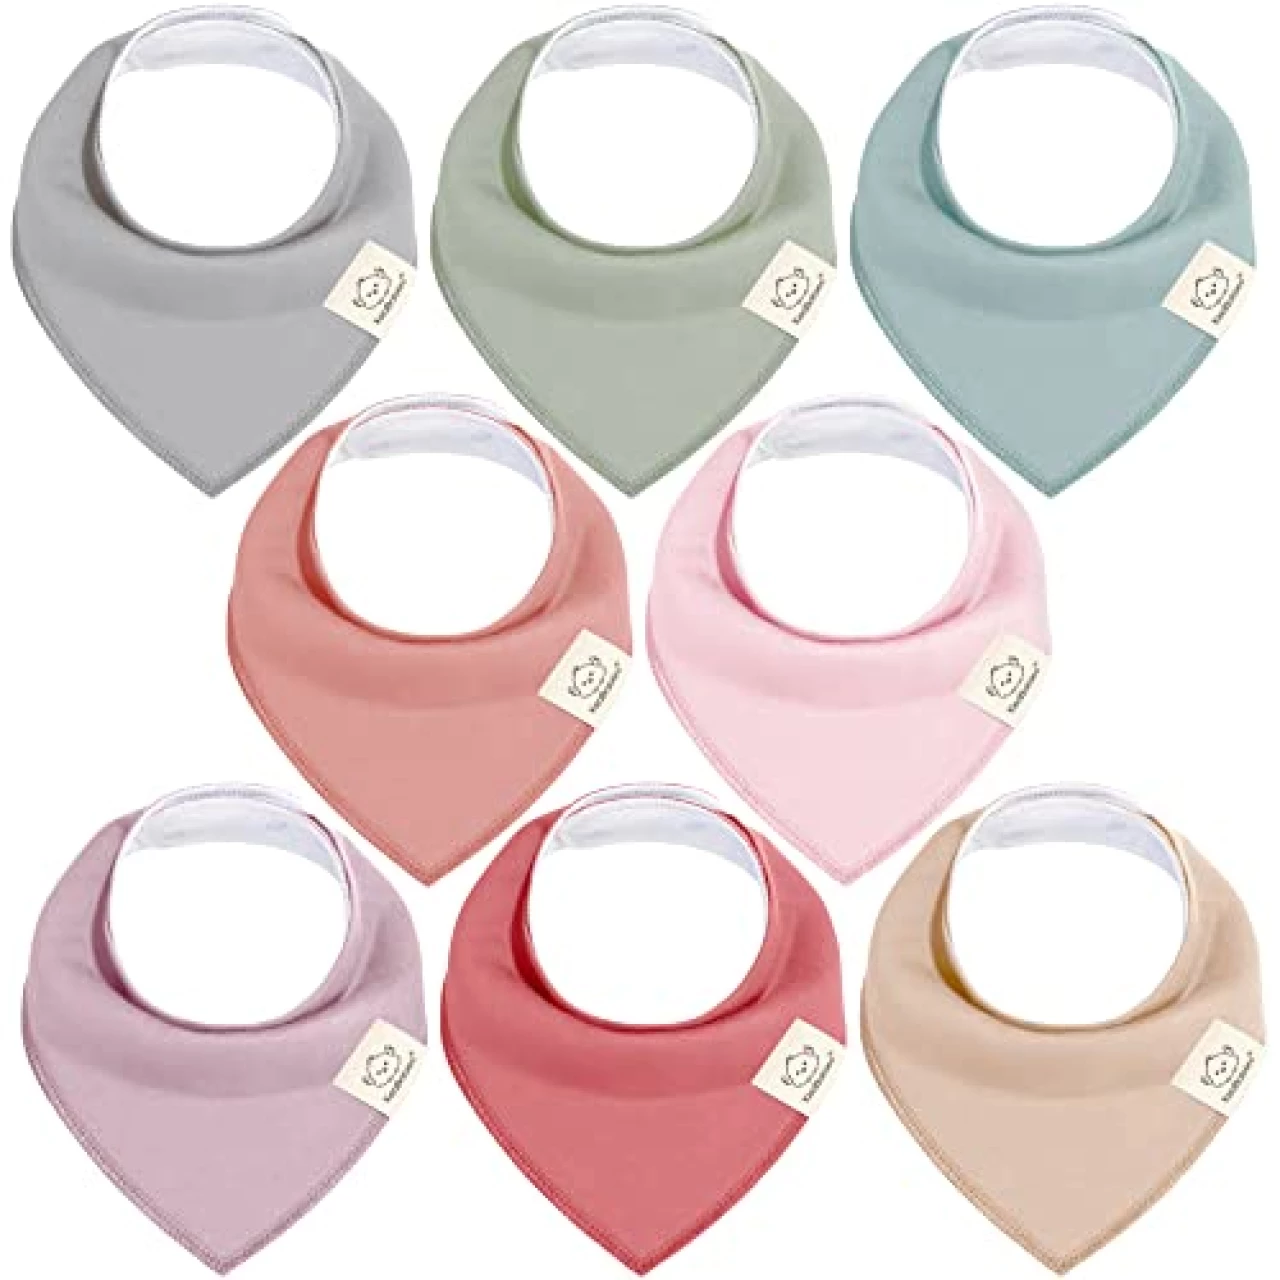 8-Pack Organic Baby Bandana Drool Bibs for Girls, Boys, Soft Cotton Teething Bibs for Infant, Toddler (Muted Pastel)